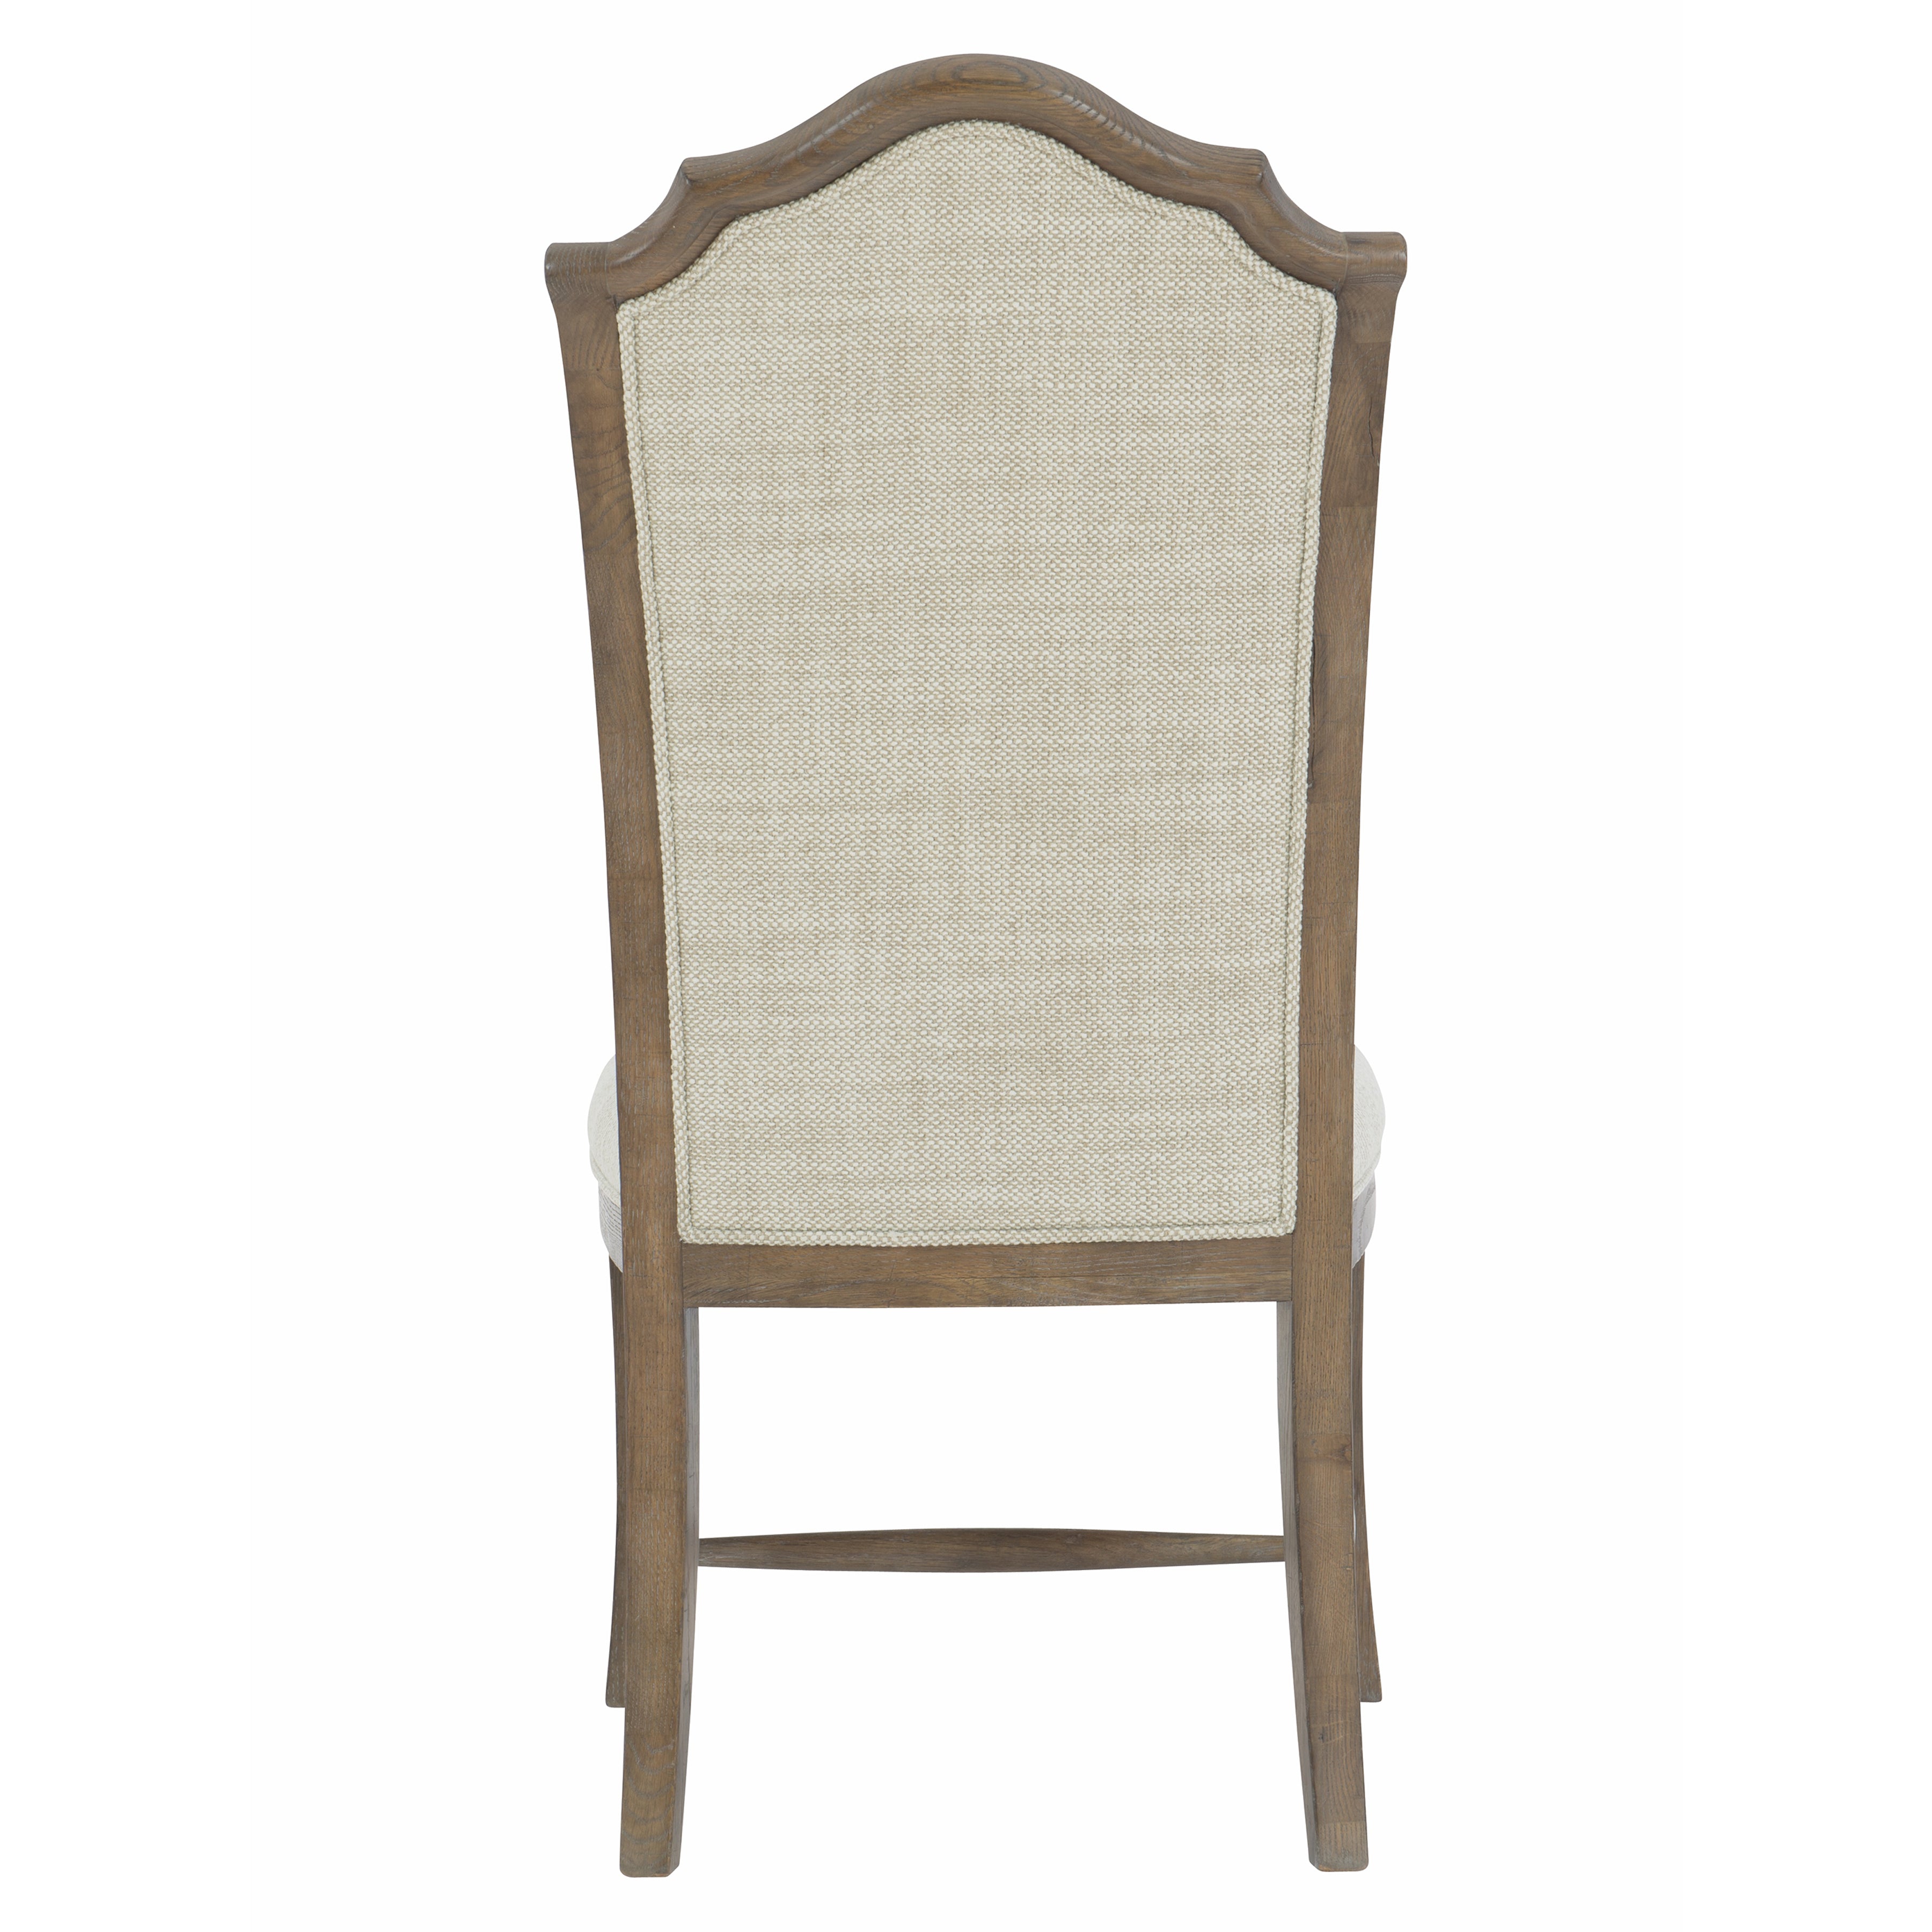 Rustic Patina Side Chair in Peppercorn Finish